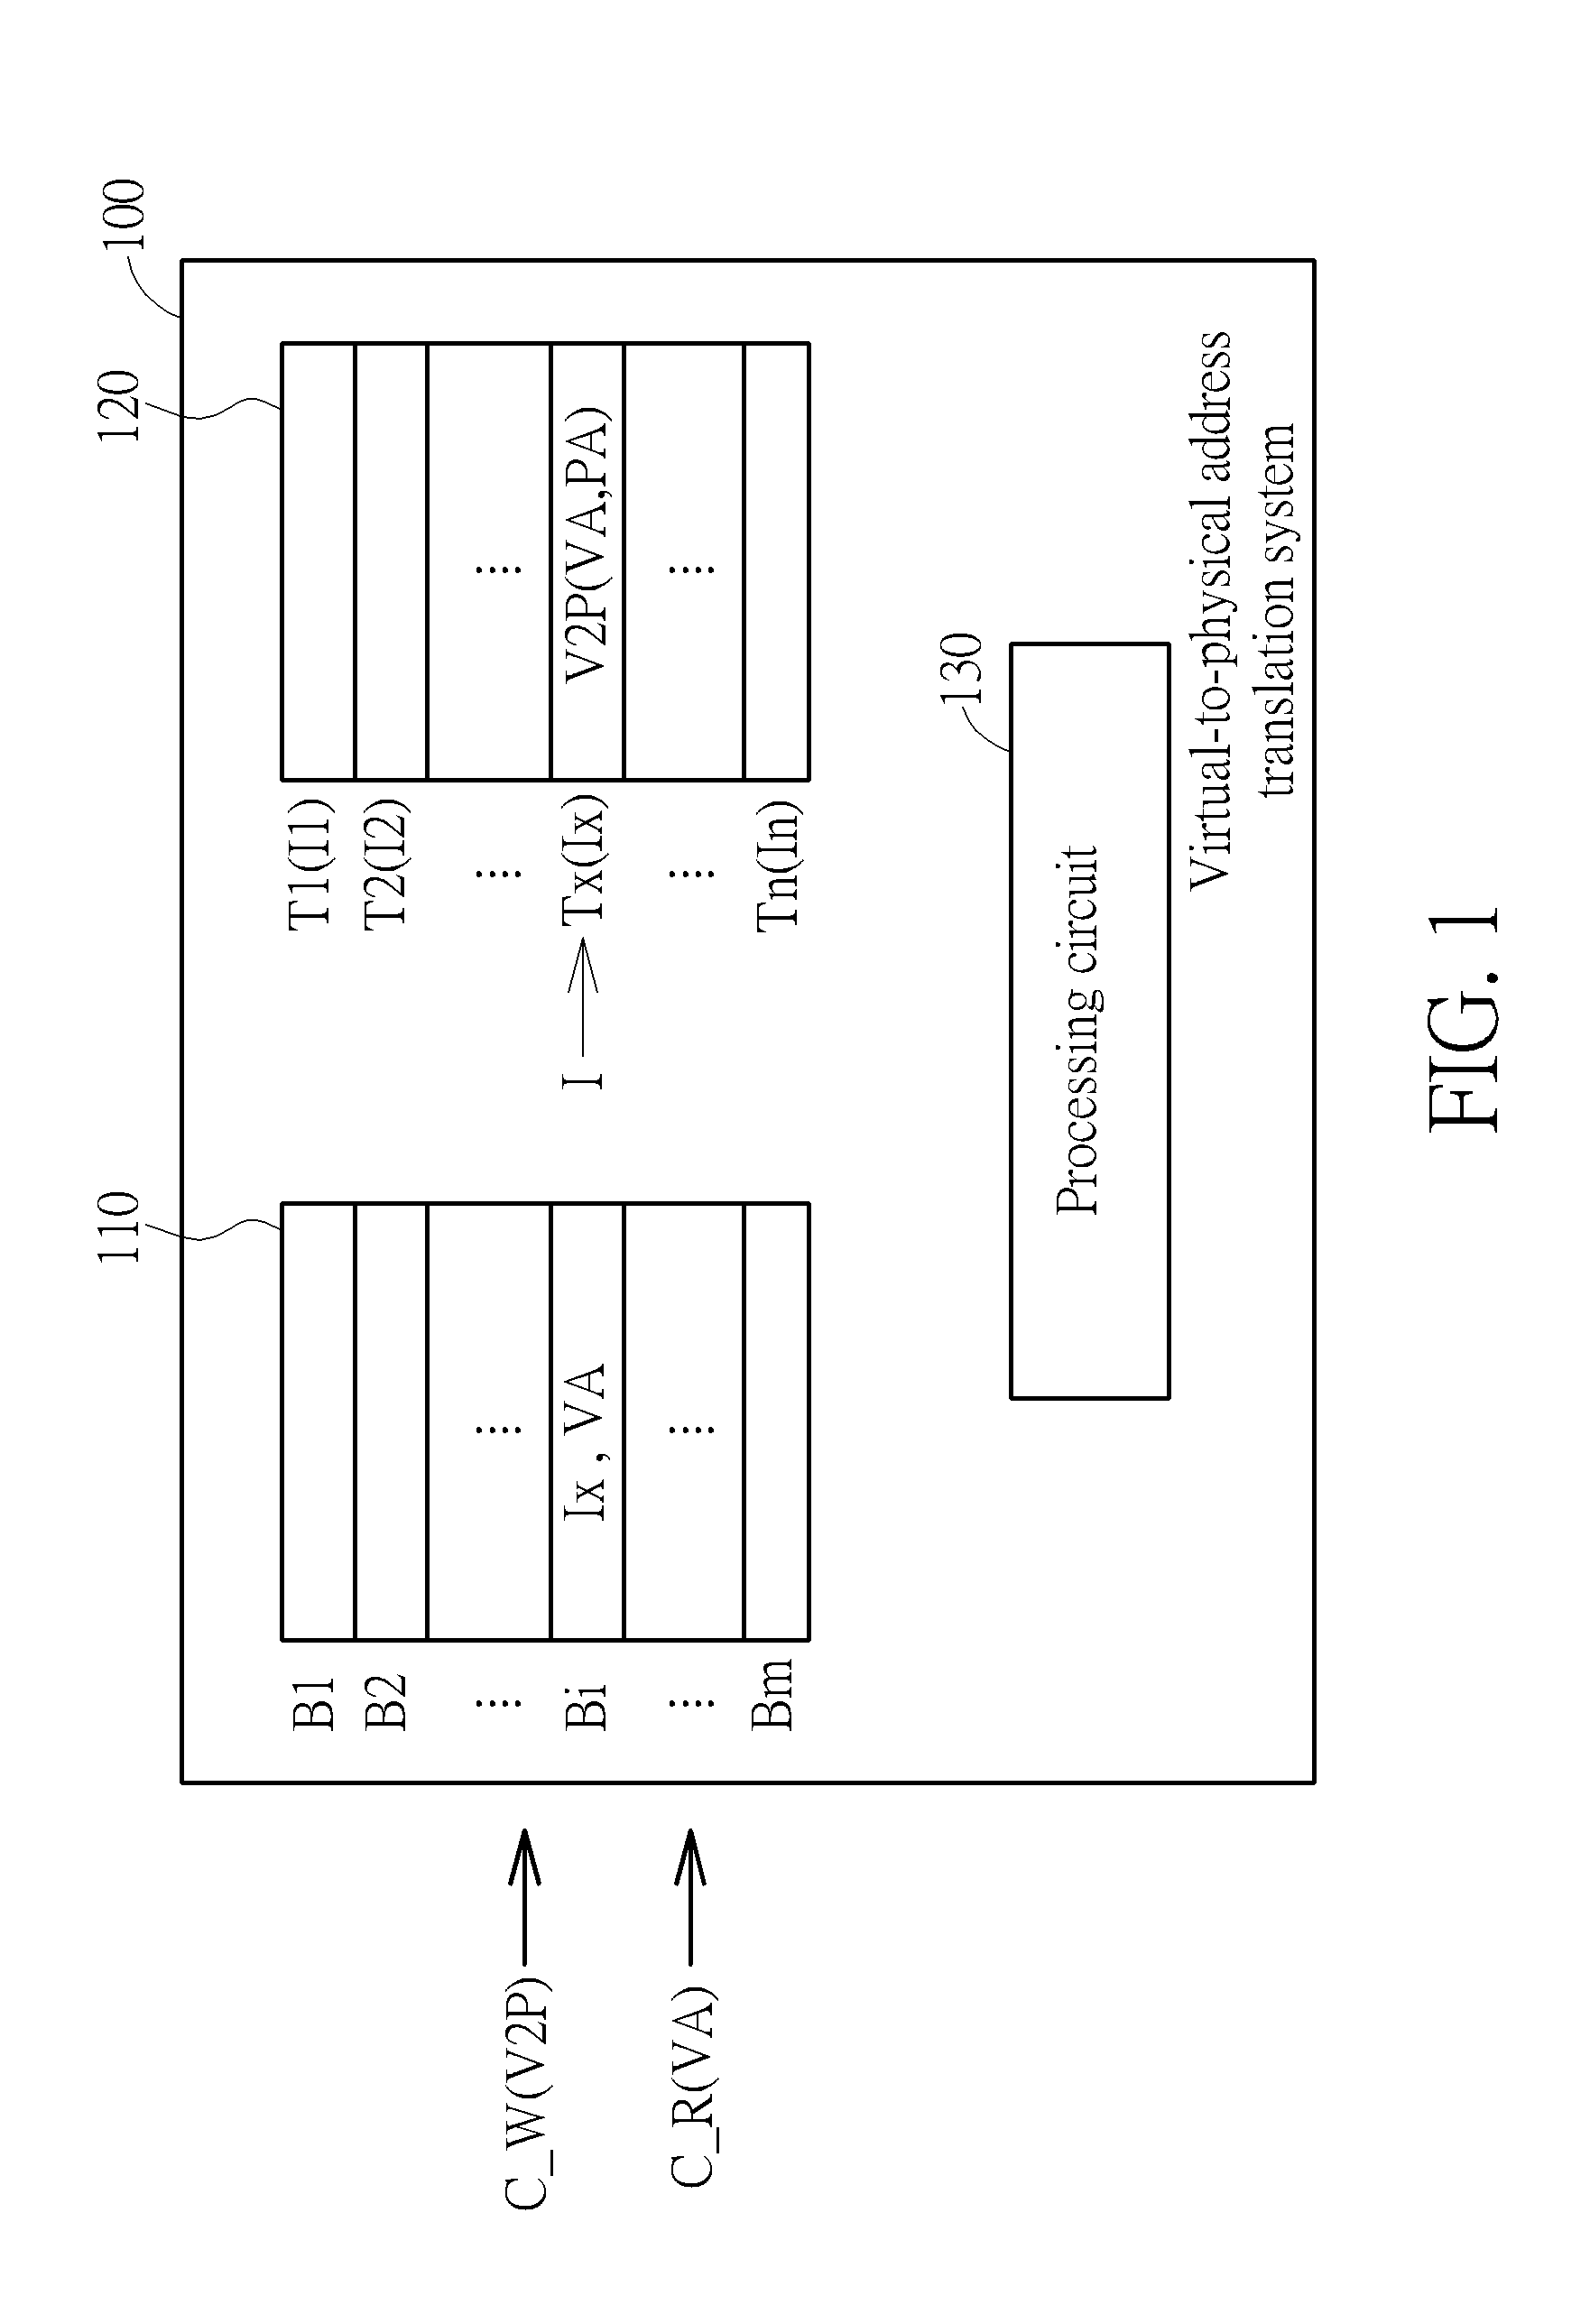 Management method of virtual-to-physical address translation system using part of bits of virtual address as index